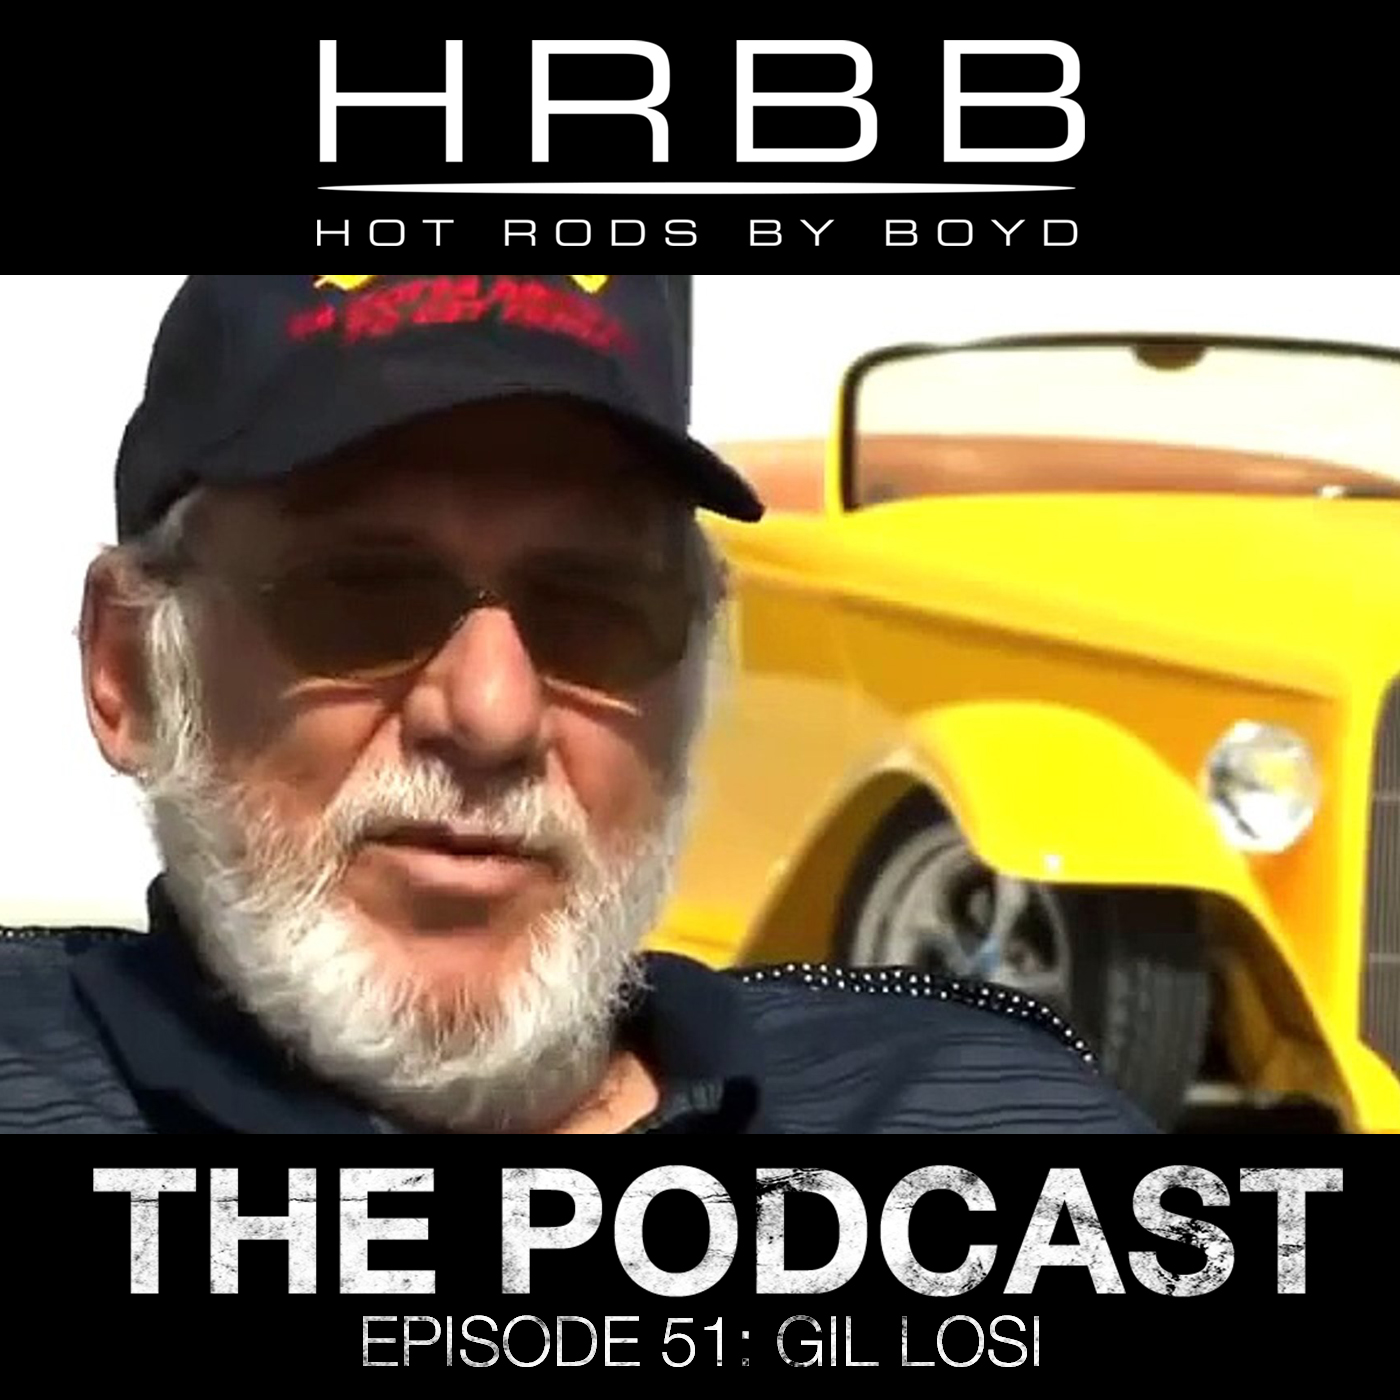 HRBB PODCAST Ep 51 - Gil Losi